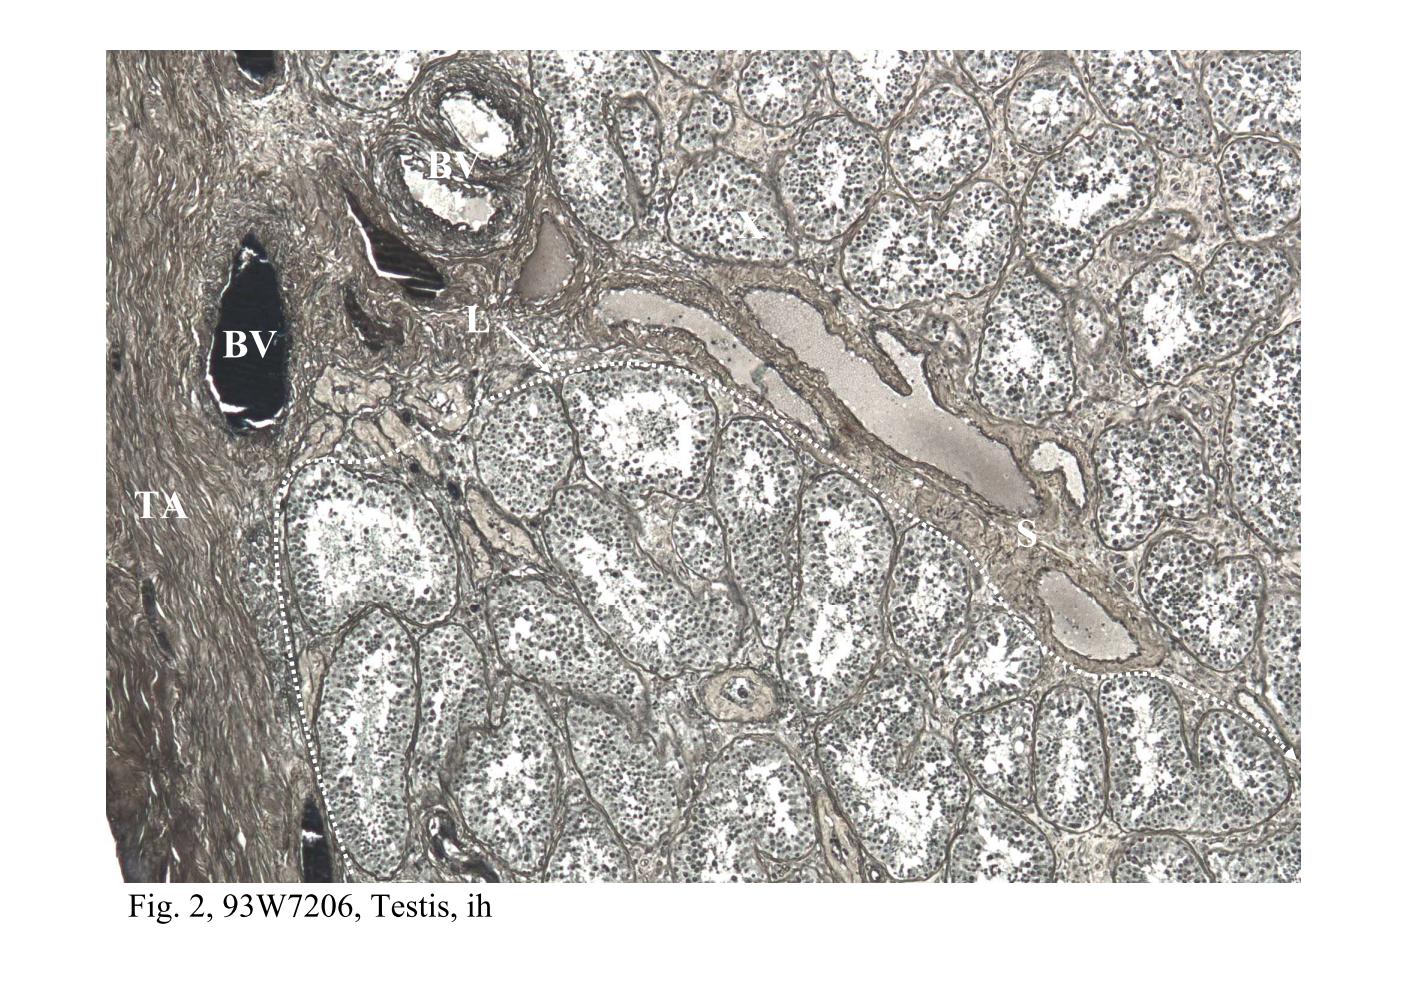 block14_06.jpg - Fig. 1 & 2, Q-1-b, Testis, h&e; 93W7206, Testis, ihThe seminiferous tubules and the tunica albuginea (TA or capsule) of the testis   organ are identified in this section. Extending from the capsule are connective   tissue septa (S) that divide the organ into several ( about 250) compartments or   lobules. Each compartment (L ¡V corresponding to a lobule) contains coiled   seminiferous tubules. Blood vessels (BV) are abundant under the capsule that   located between the tunica albuginea and seminiferous tubules is referred as the   tunica vasculosa. The branches of the blood vessels extending within the   connective tissue septa are also observed.The seminiferous tubules are convoluted, therefore, the profiles of them present in a   section are variable in appearance. Sometimes, the wall of a tubule is sectioned   tangentially, thus obscuring the lumen and revealing what appears to be a solid   mass of cells (X).